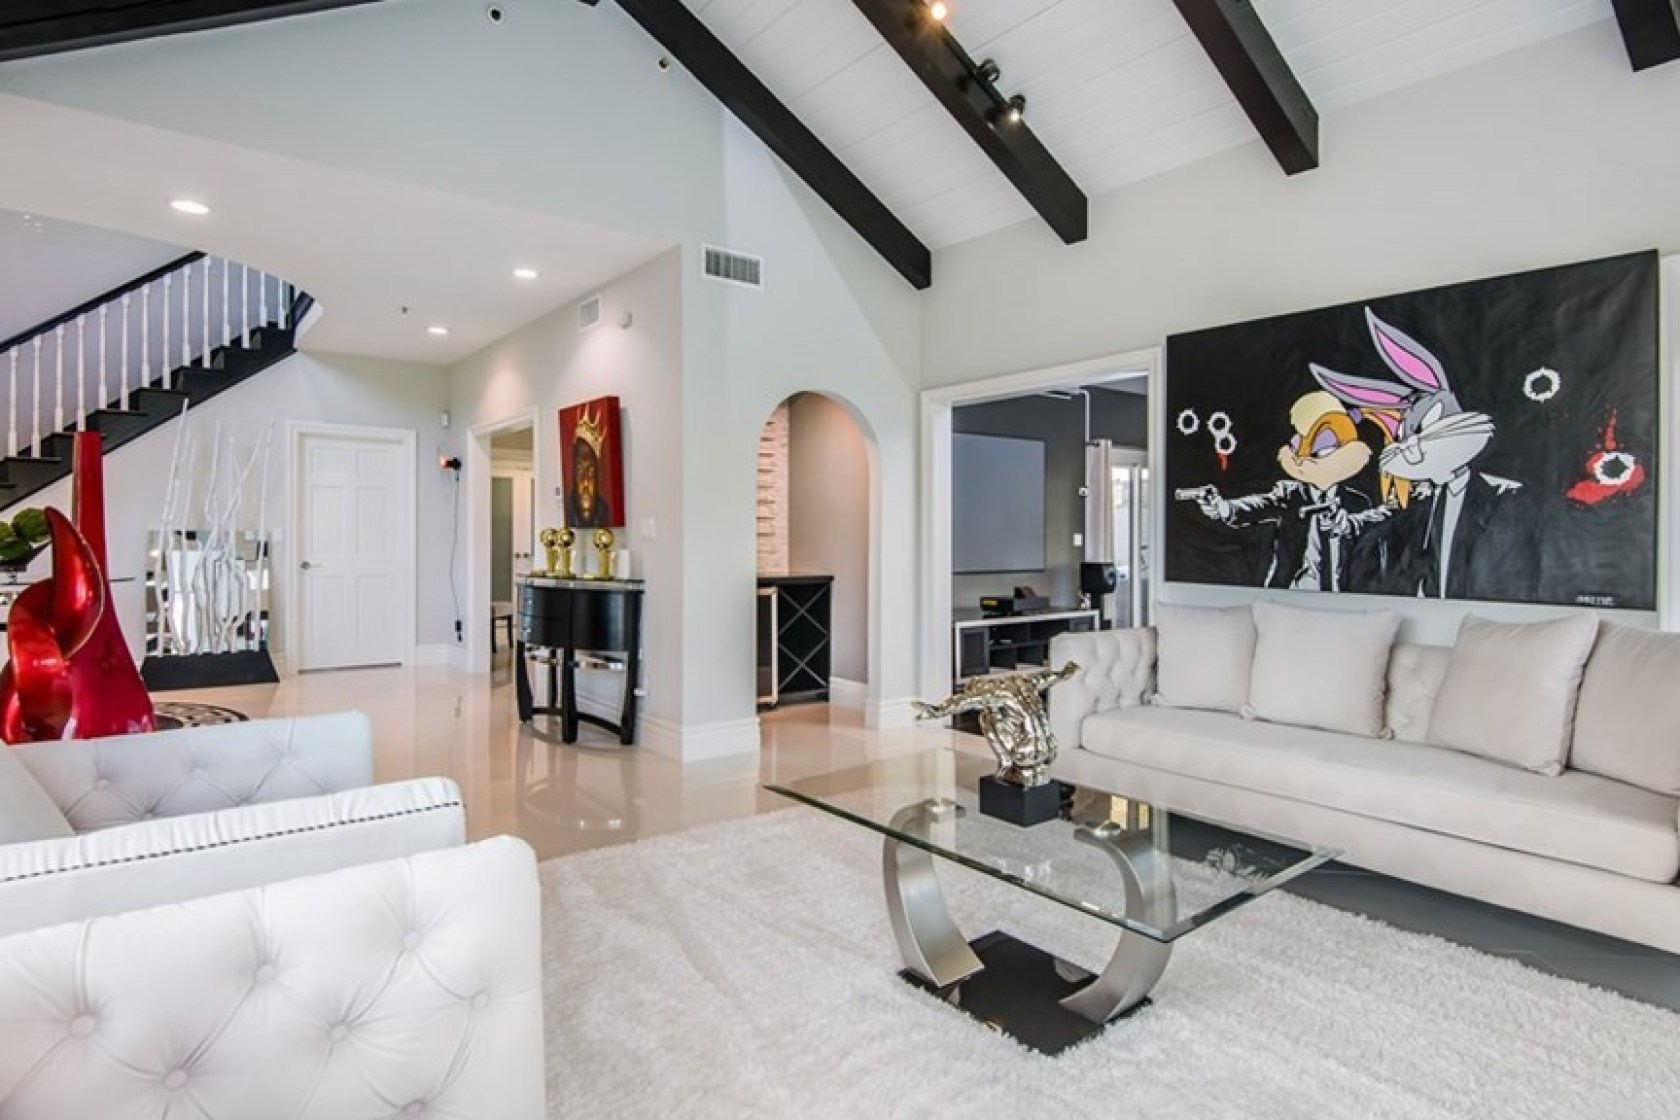 Shaquille O’Neal Puts His $2.5 Million L.A. Home Up For Sale 840876132